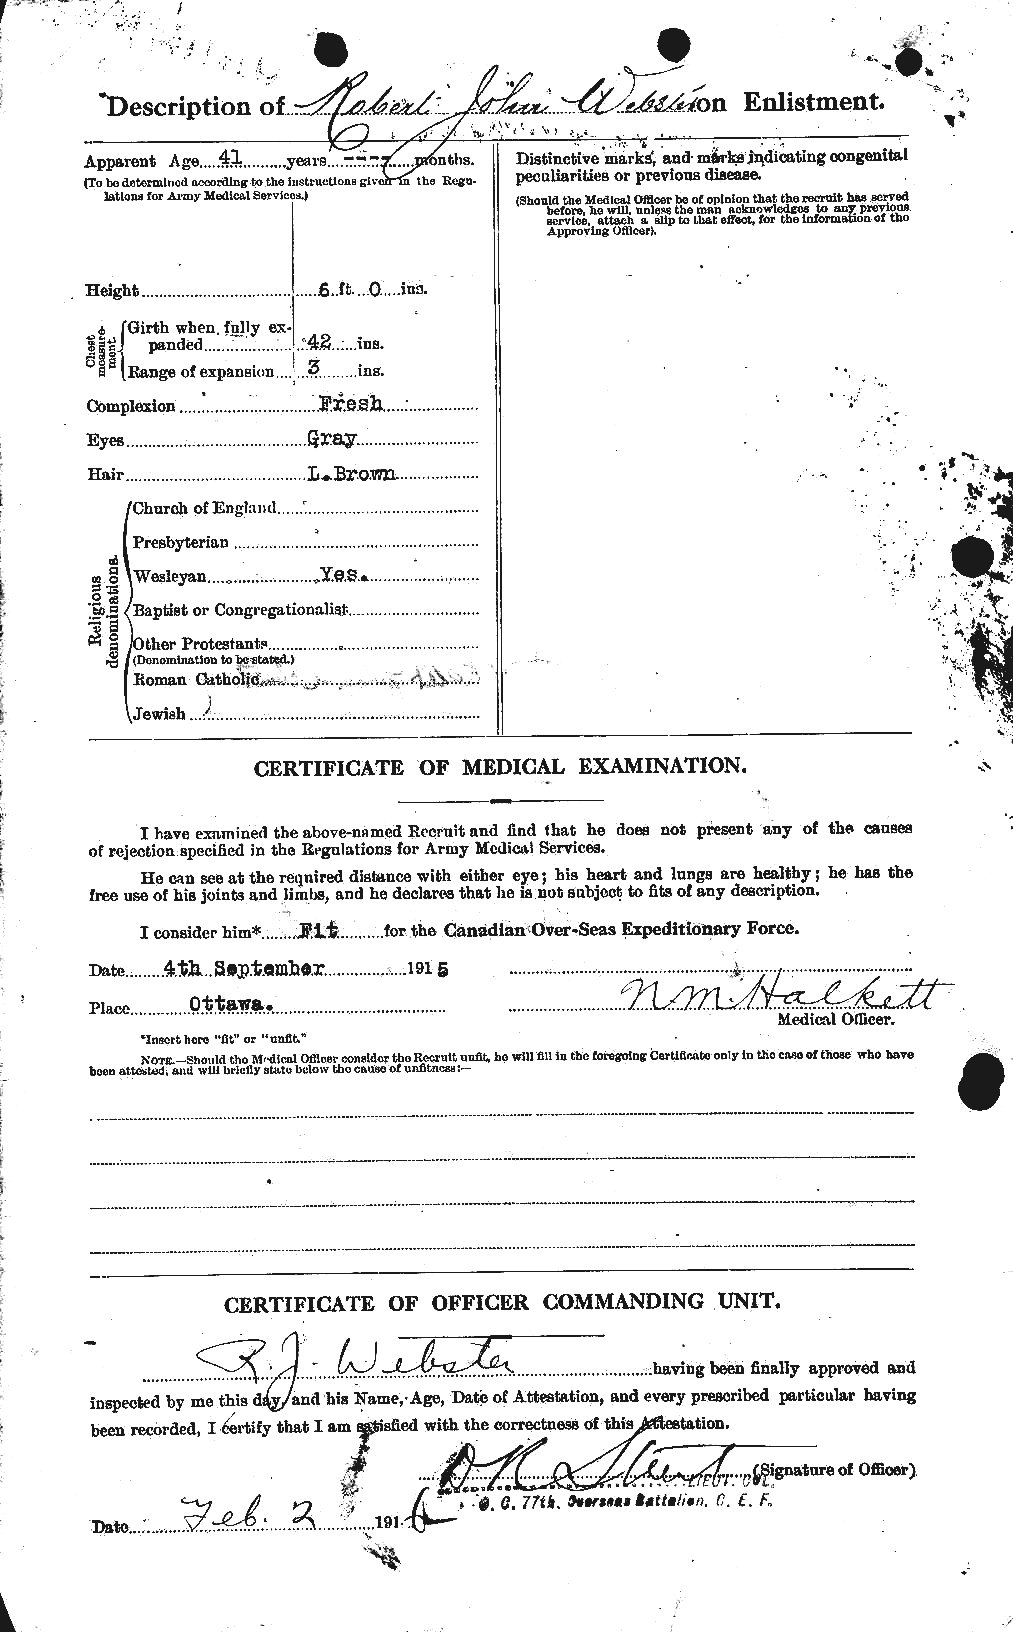 Personnel Records of the First World War - CEF 661965b